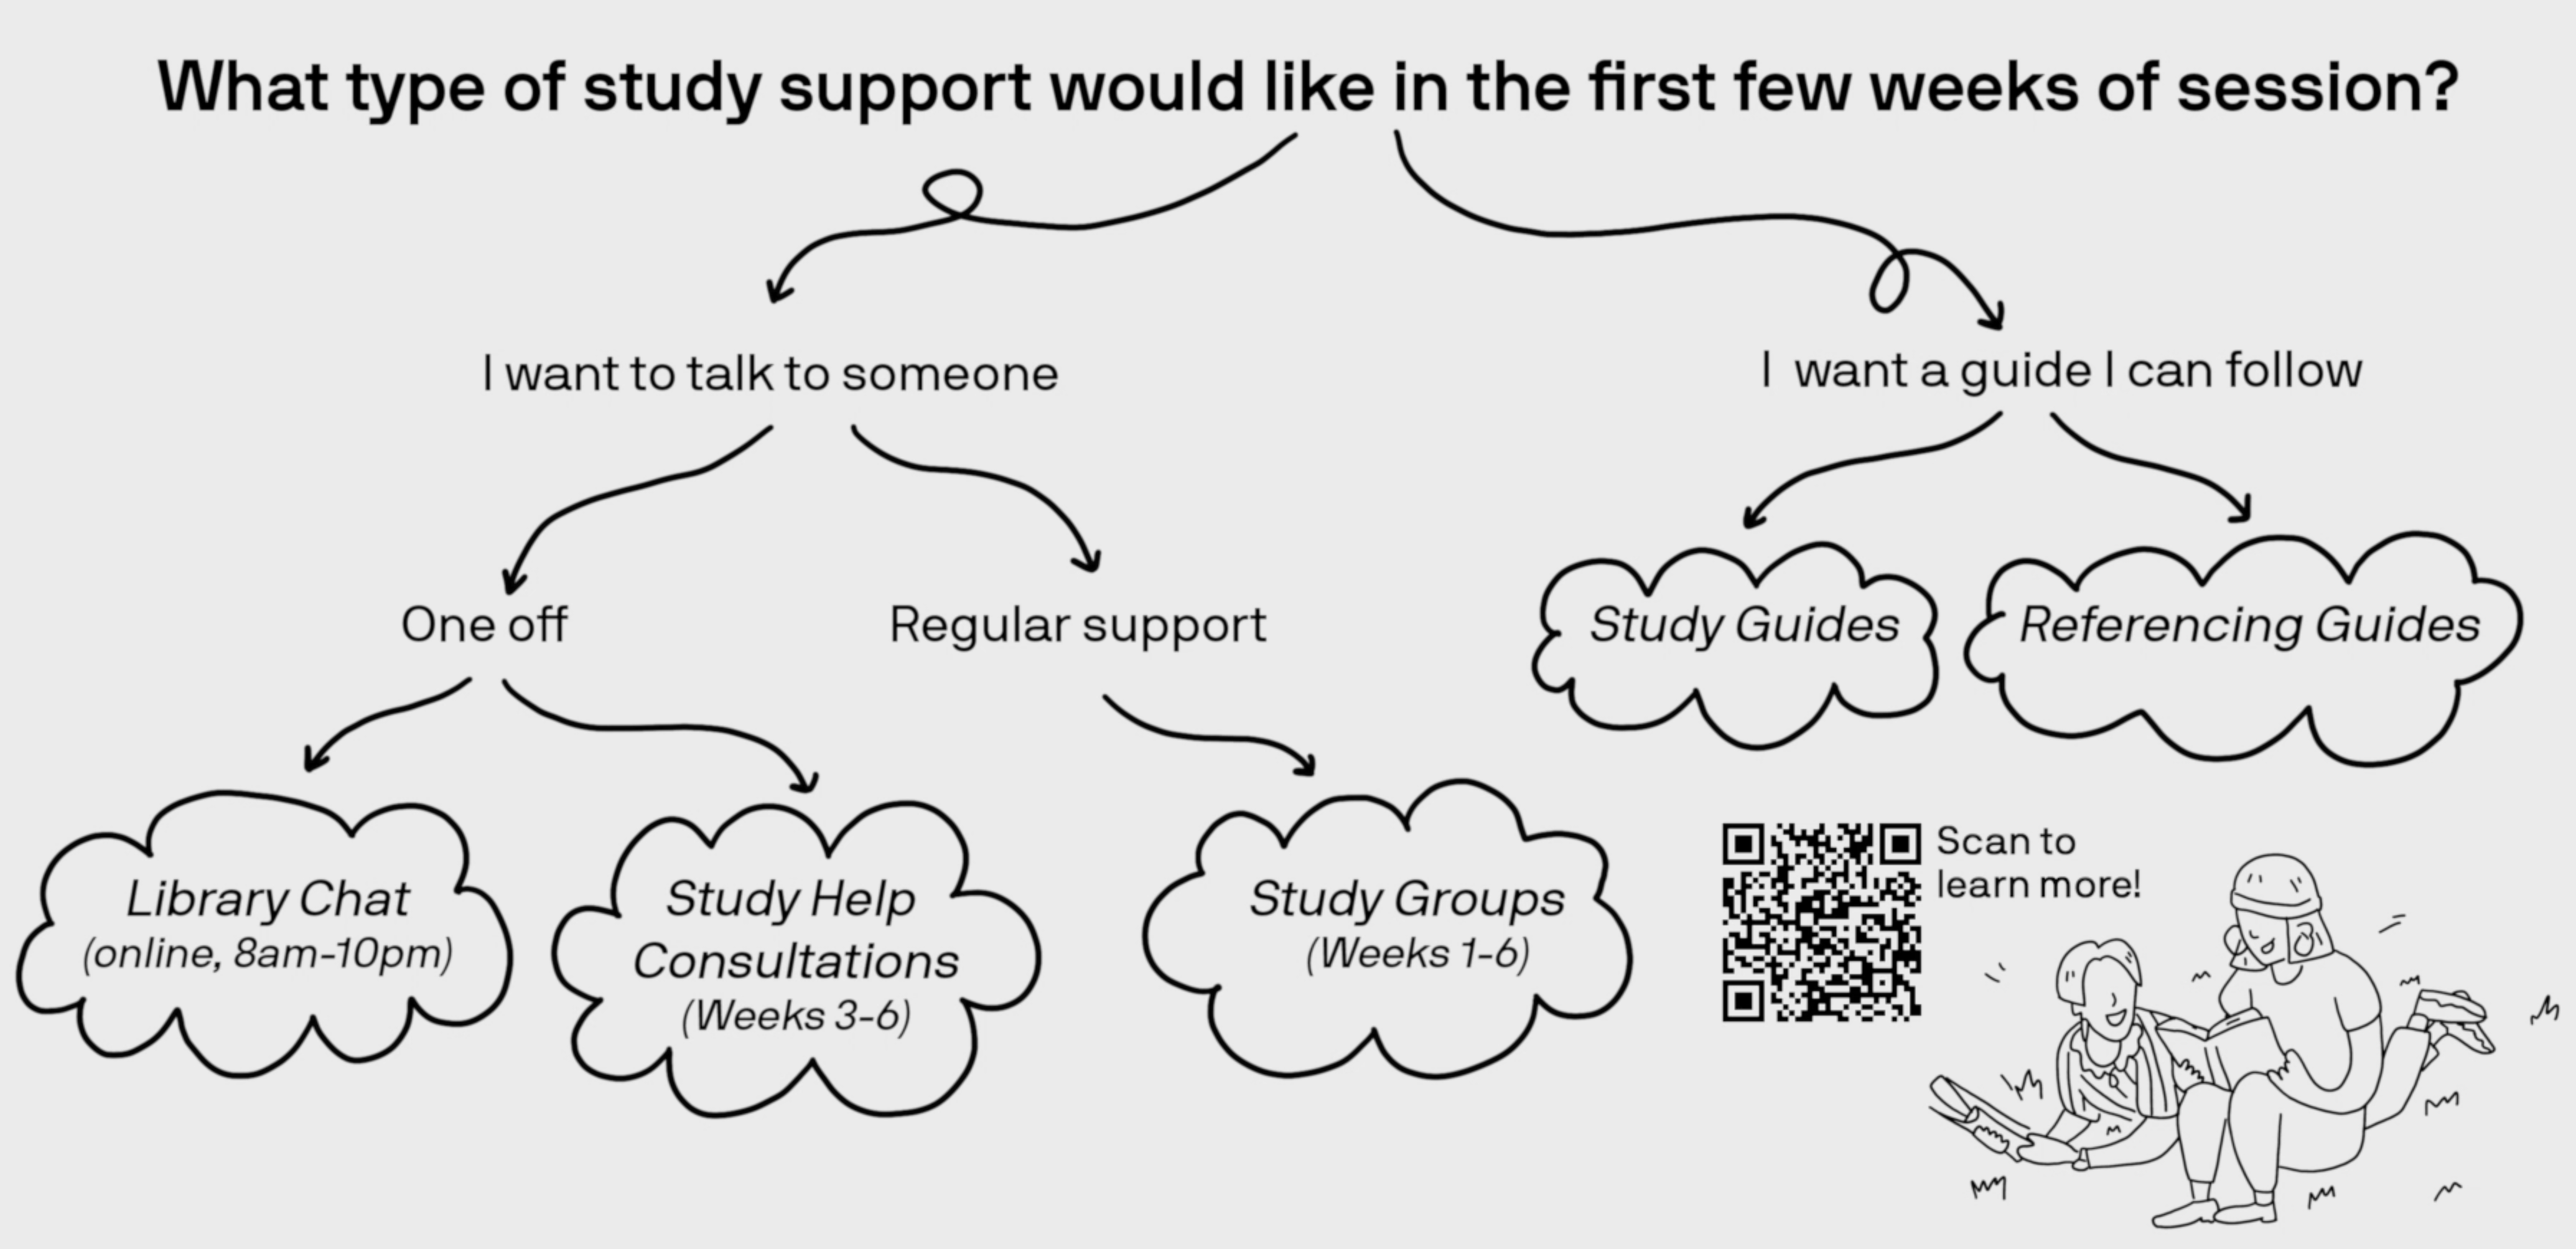 Flow chart with all the study support services available during the first few weeks of session